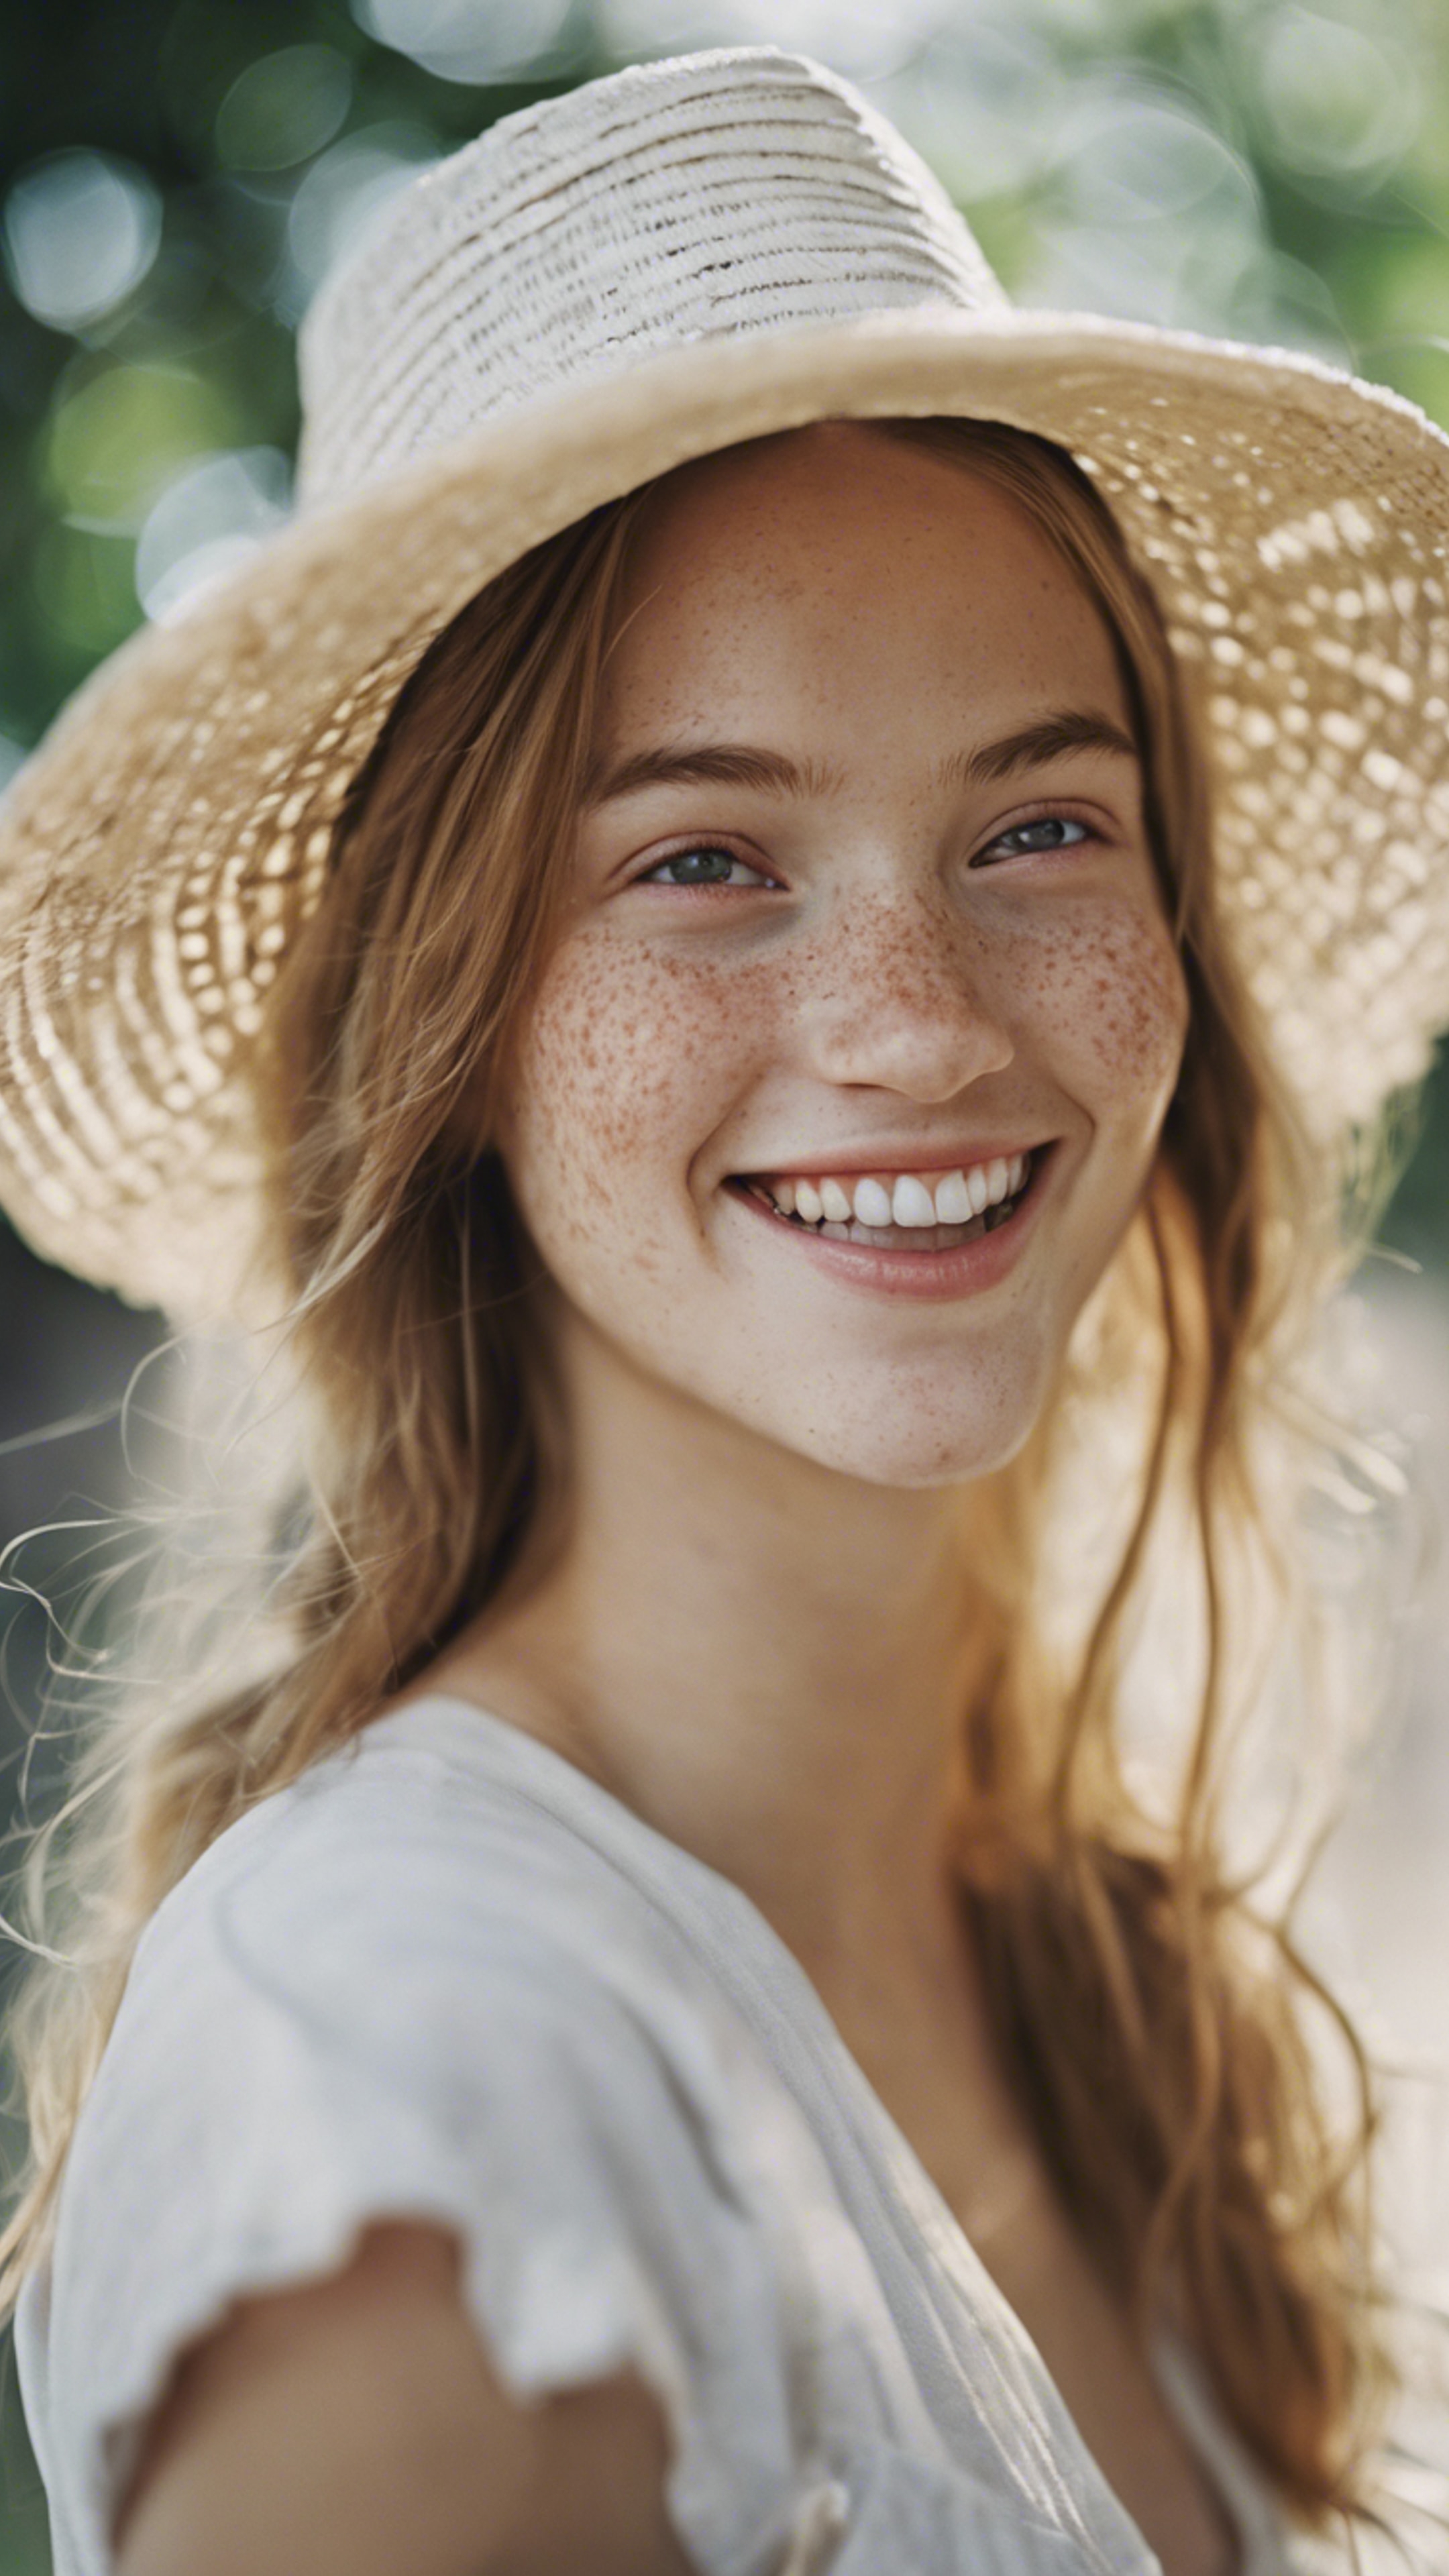 A portrait of a cute girl with freckles and a big smile, wearing a white straw hat. ورق الجدران[344e43c9fe594ea98e55]